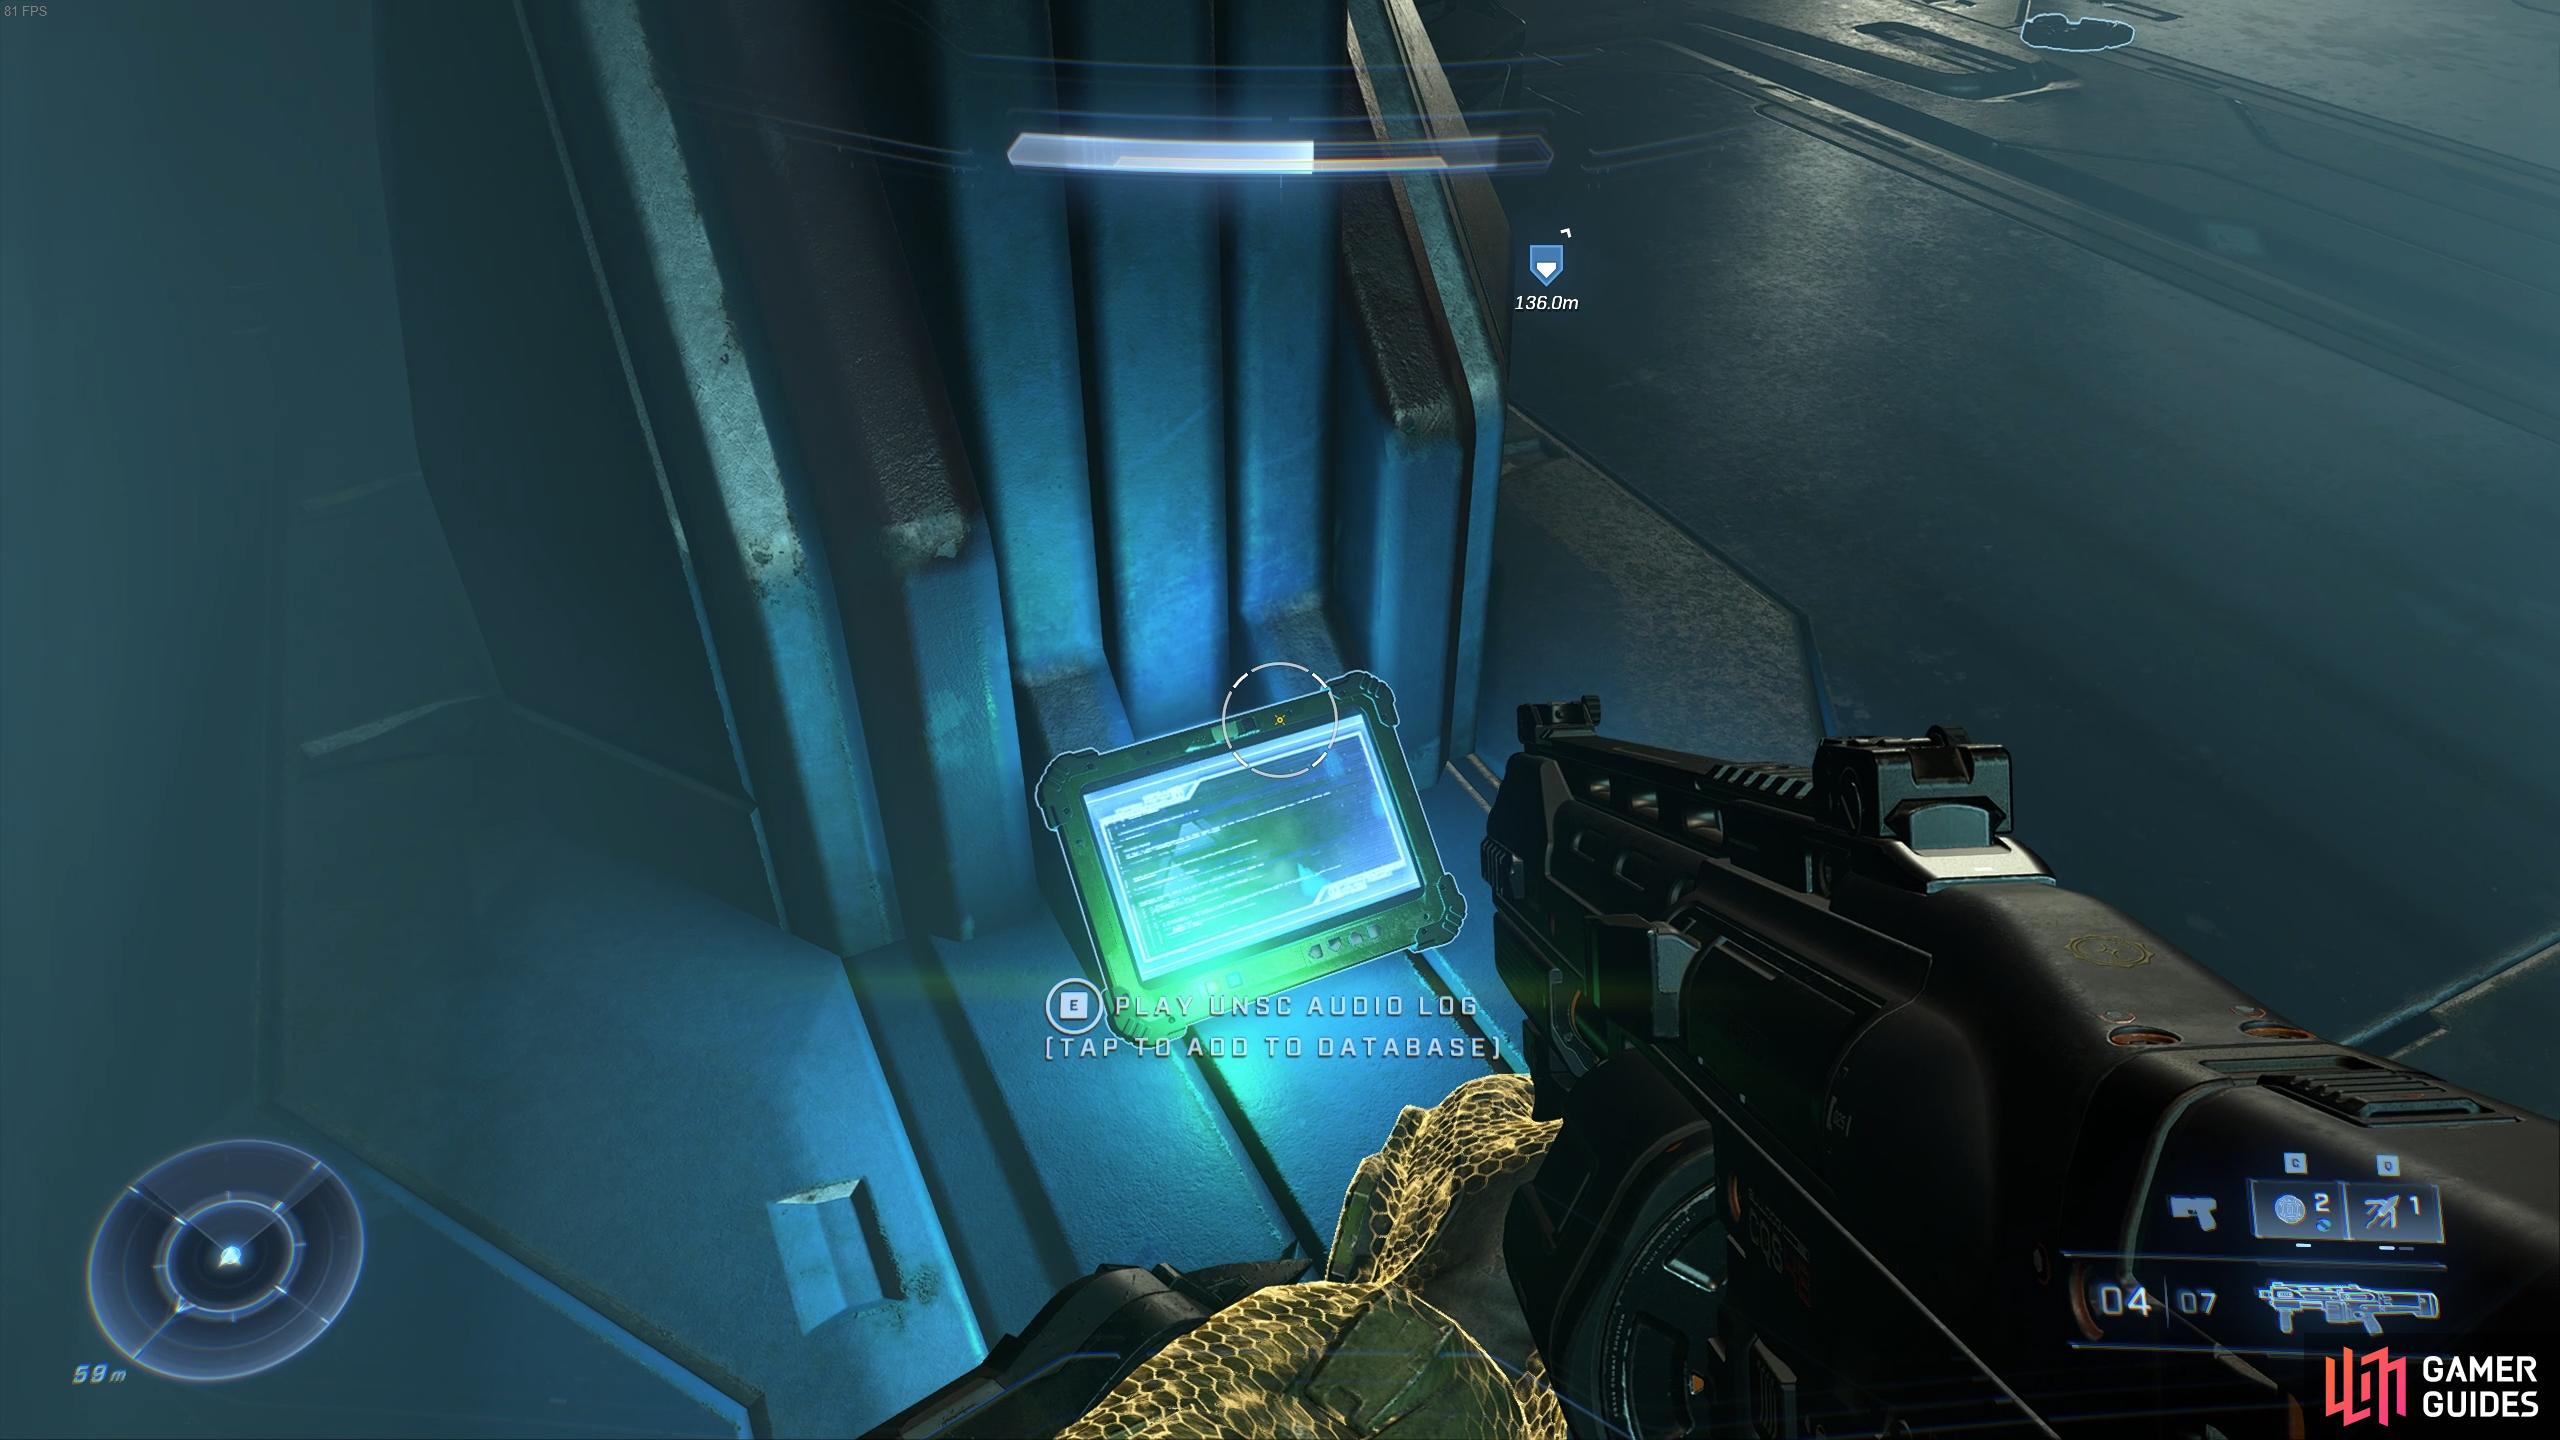 You'll find the UNSC log inside the tower just after obtaining the Threat Sensor.